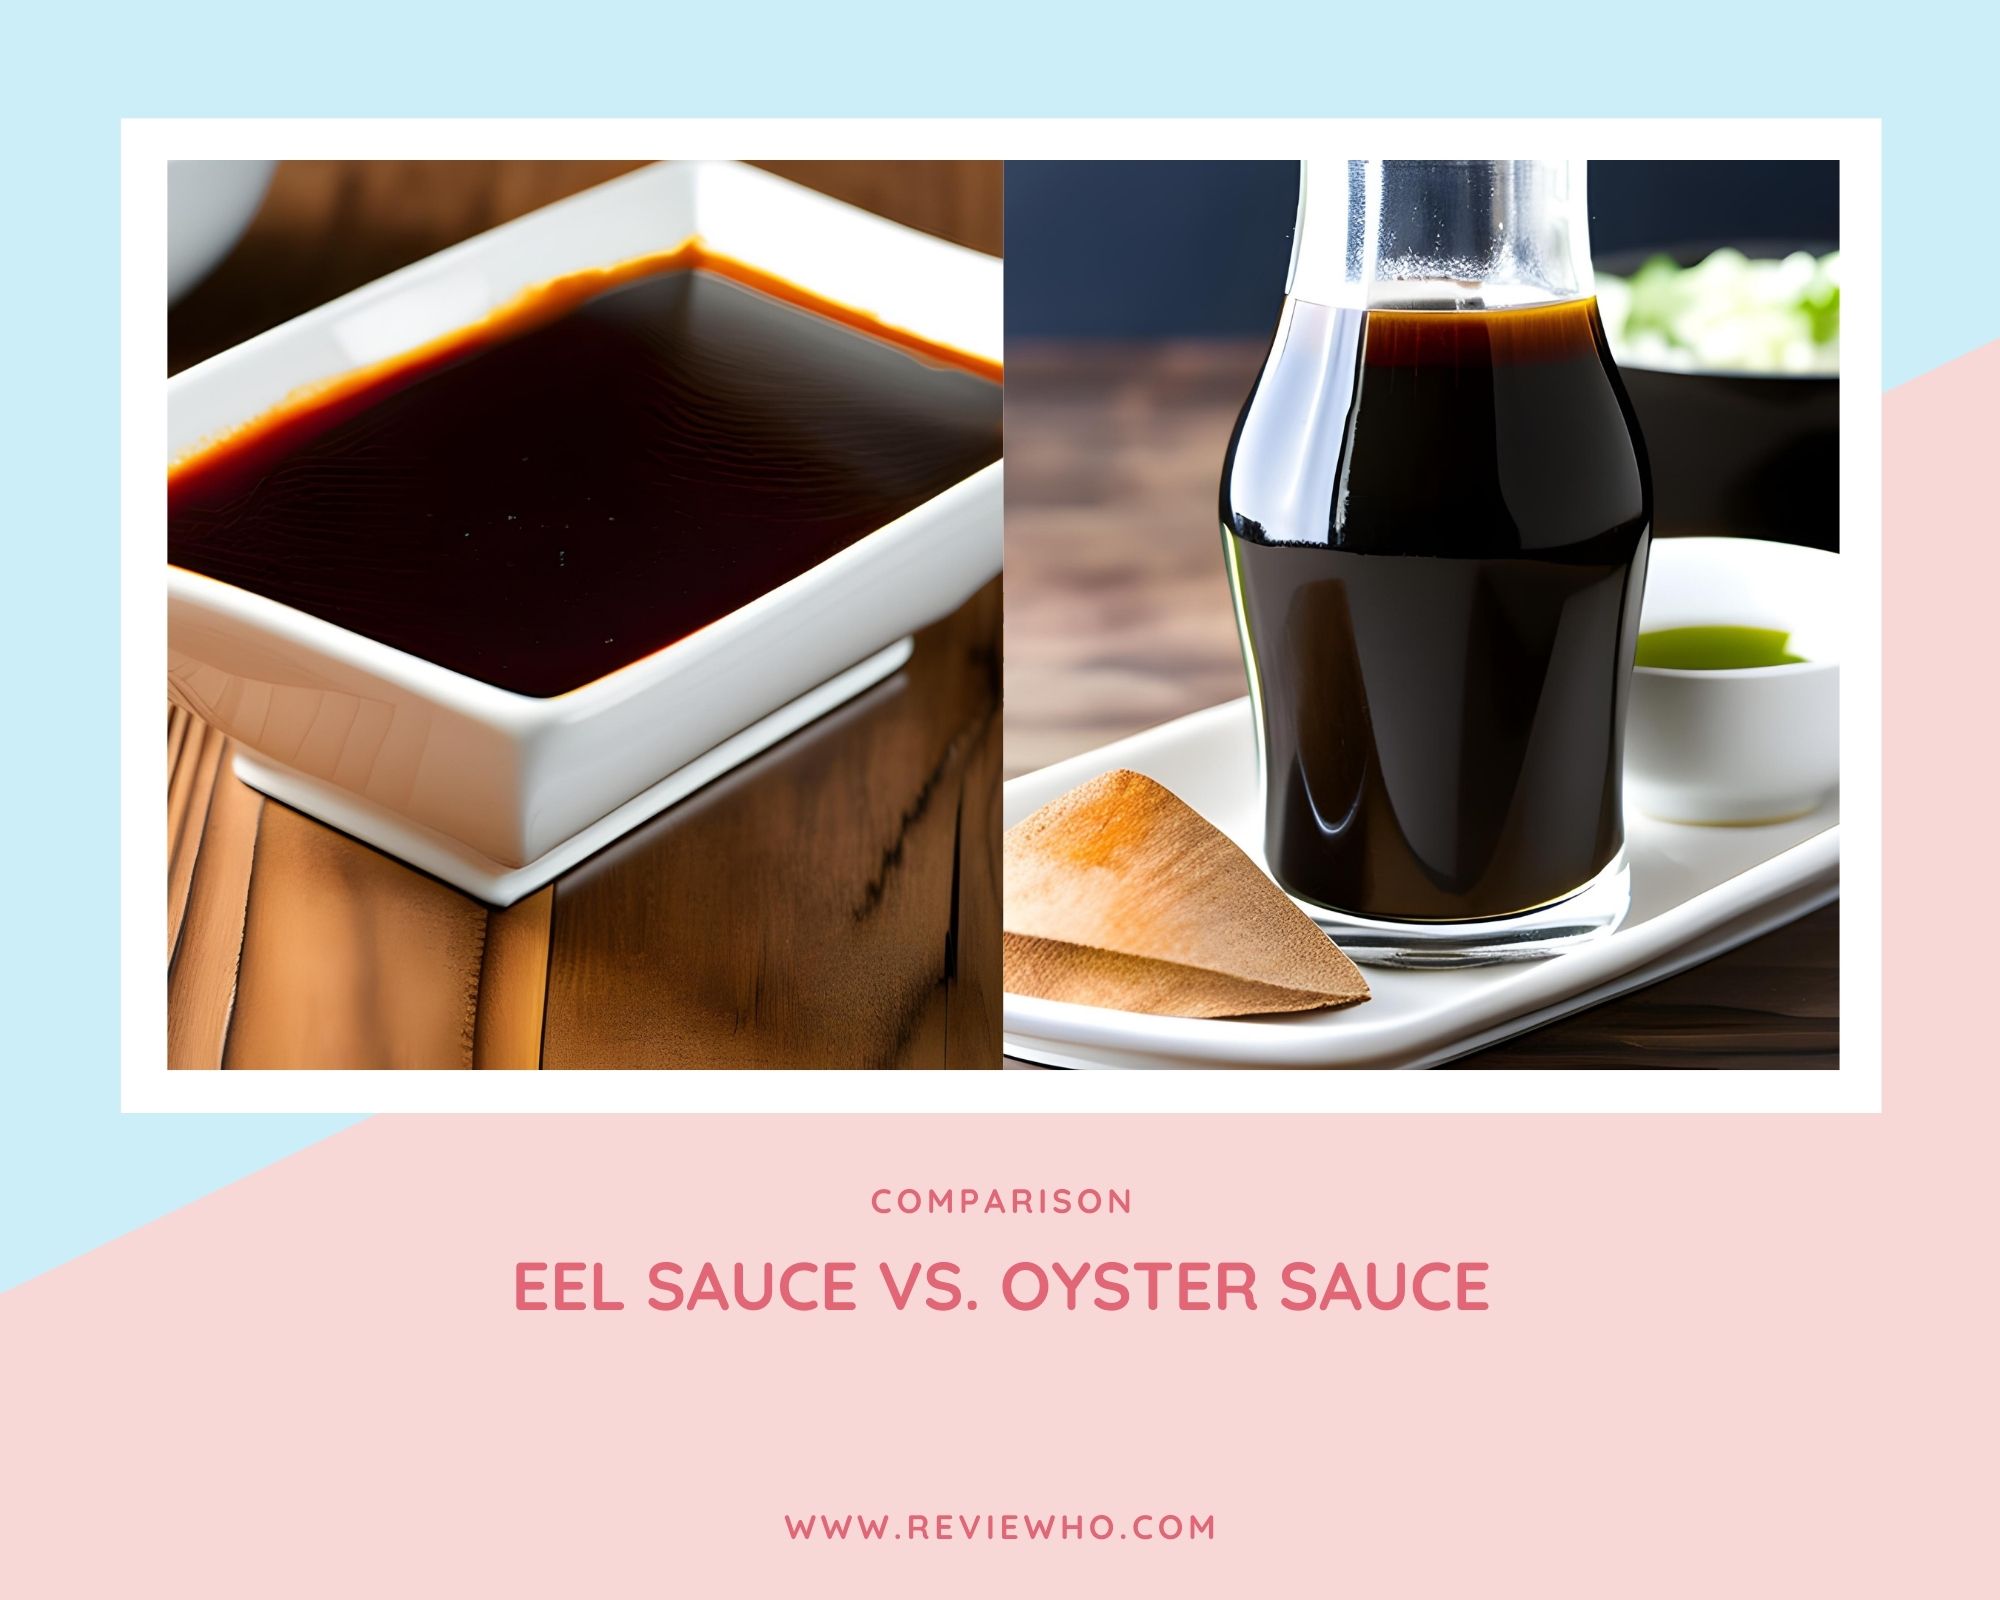 Difference between Eel Sauce and Oyster Sauce